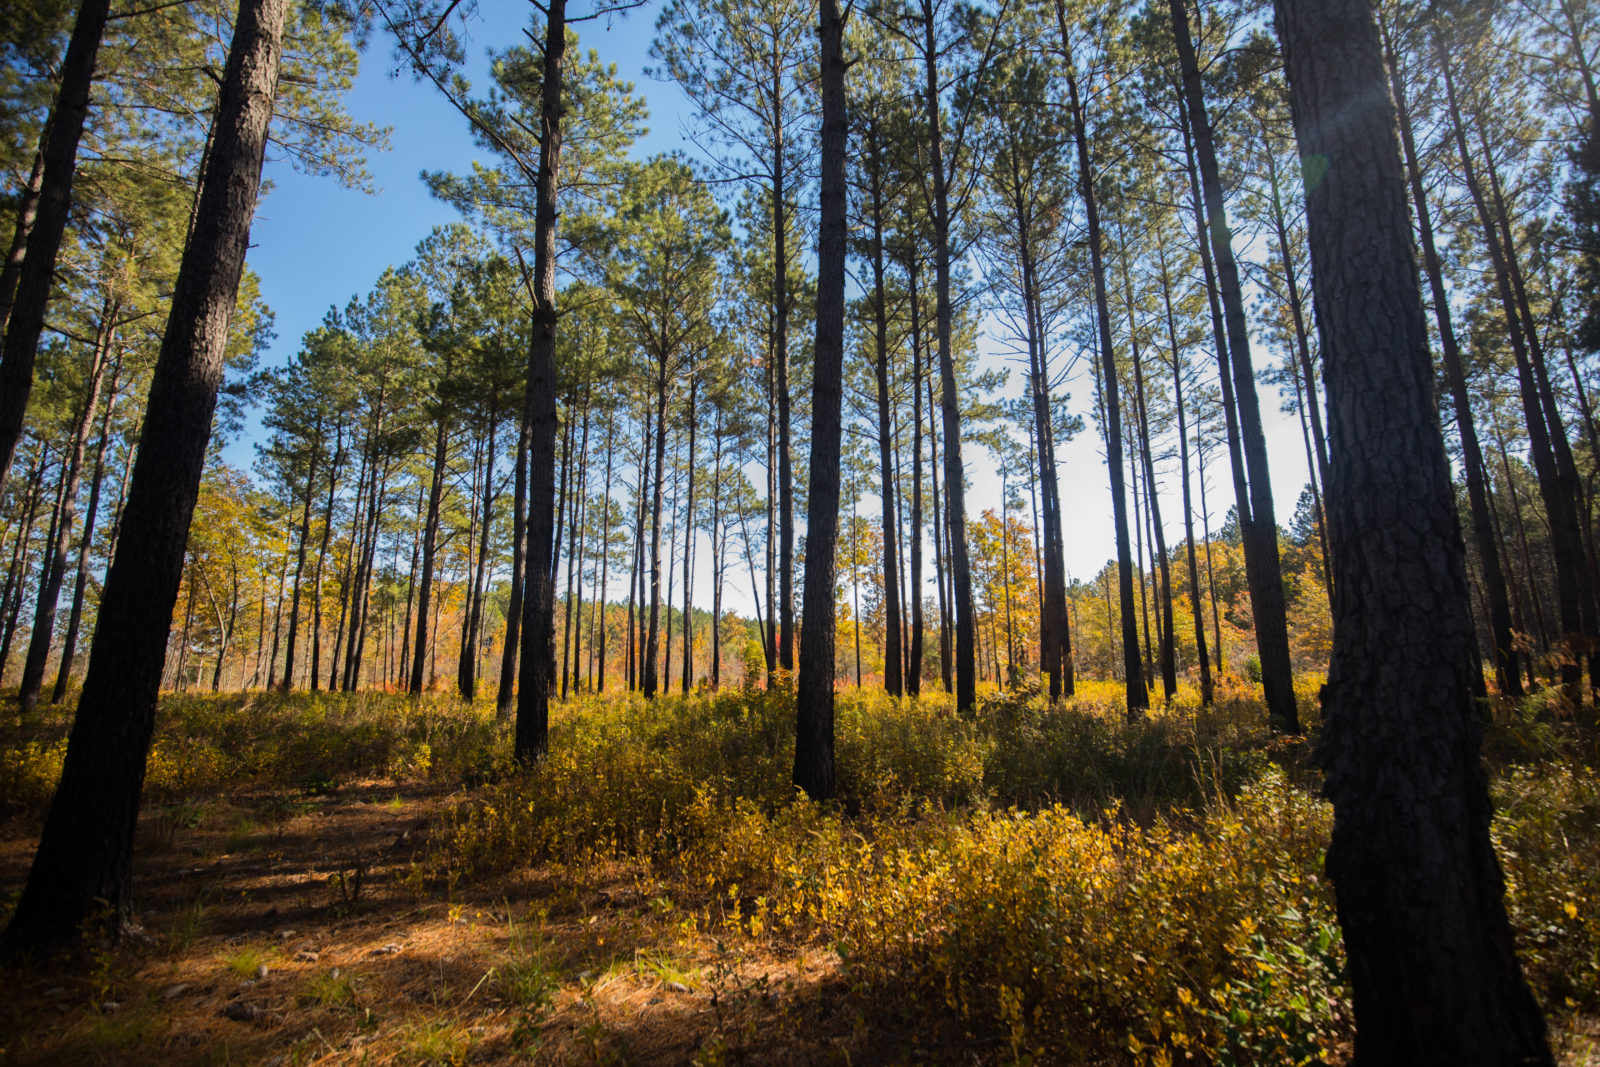 An image of a pine savannah from the Big Woods wildlife management area